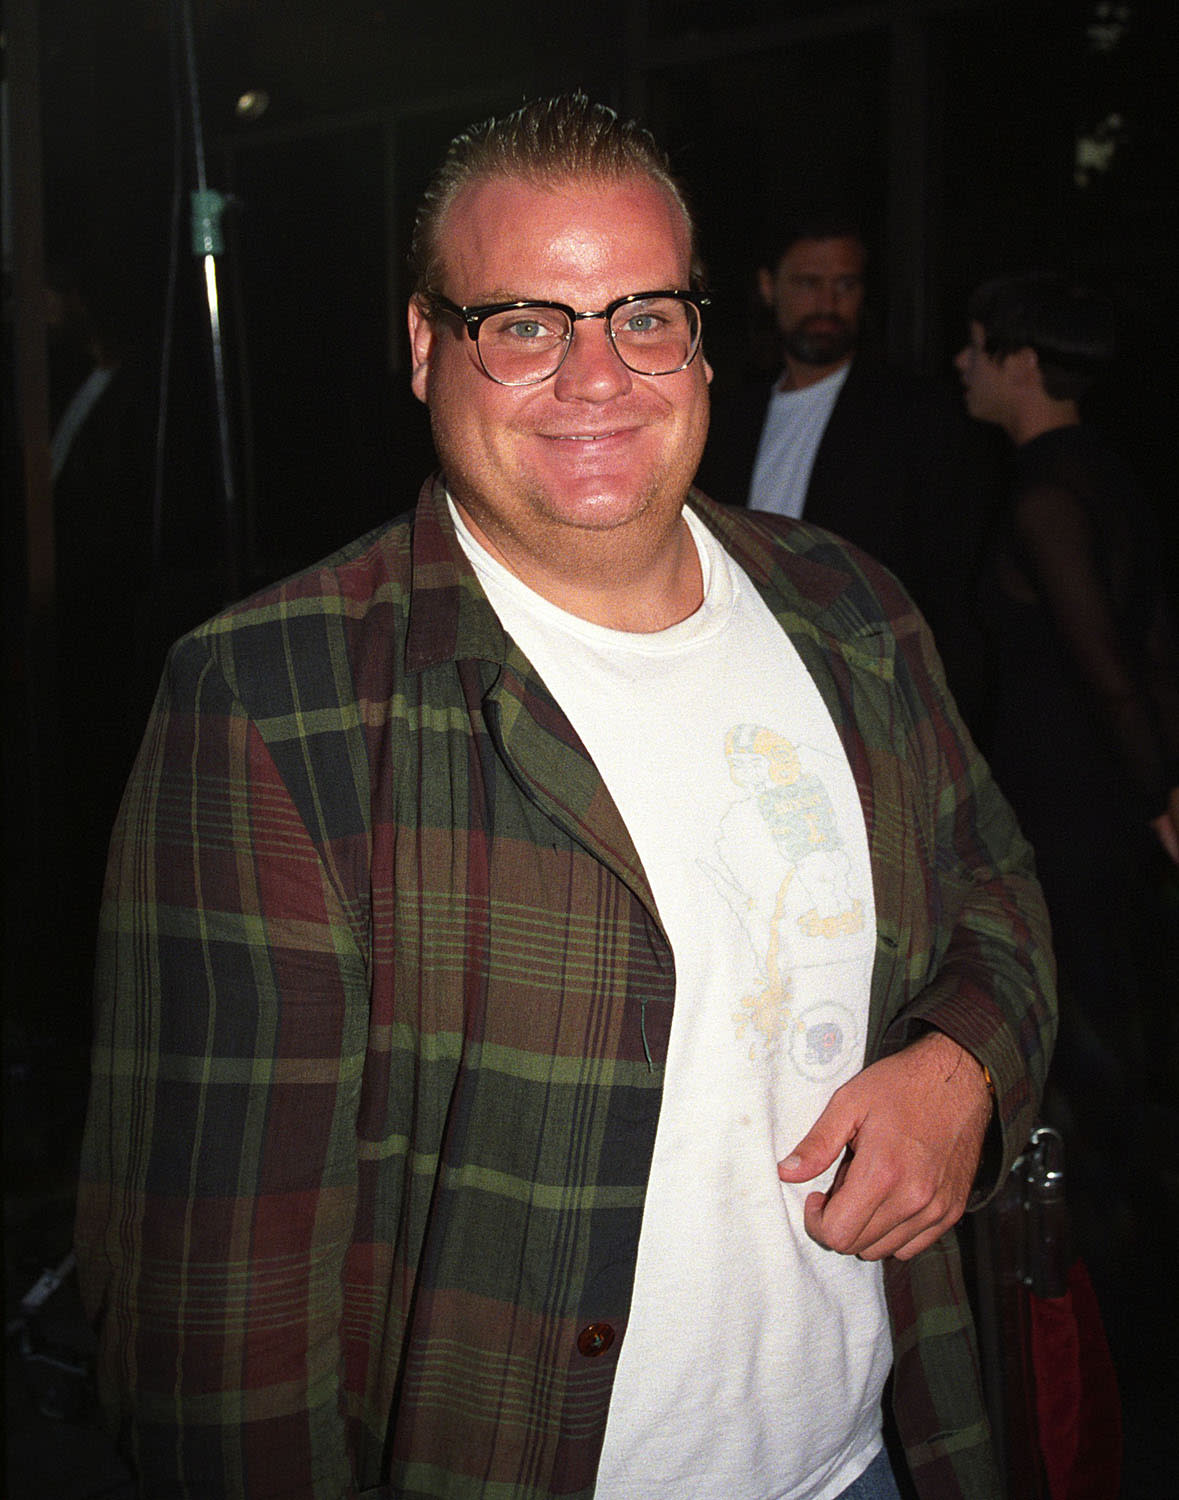 Chris Farley at the <em>Hearts and Souls</em> premiere in Los Angeles in August 1993. (Photo: Berliner Studio/BEI/Rex/Shutterstock)